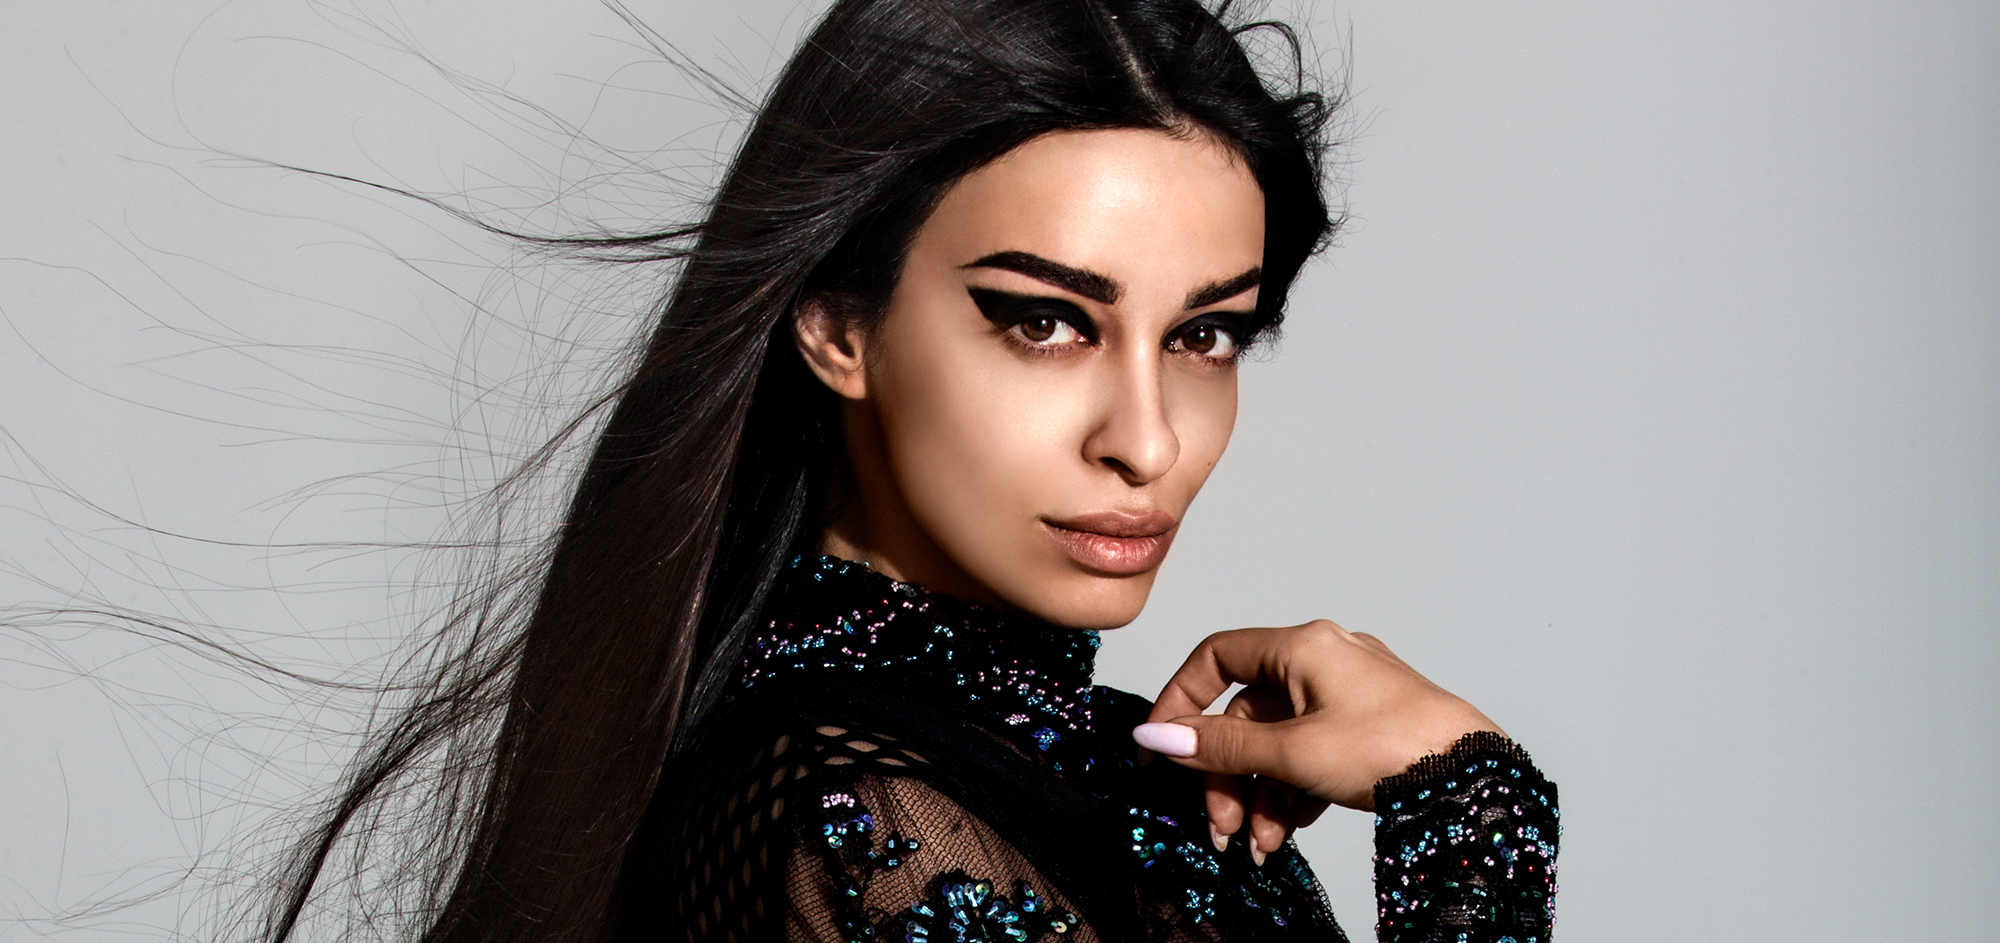 Cyprus: It is Official, Eleni Foureira and Fuego in Lisbon